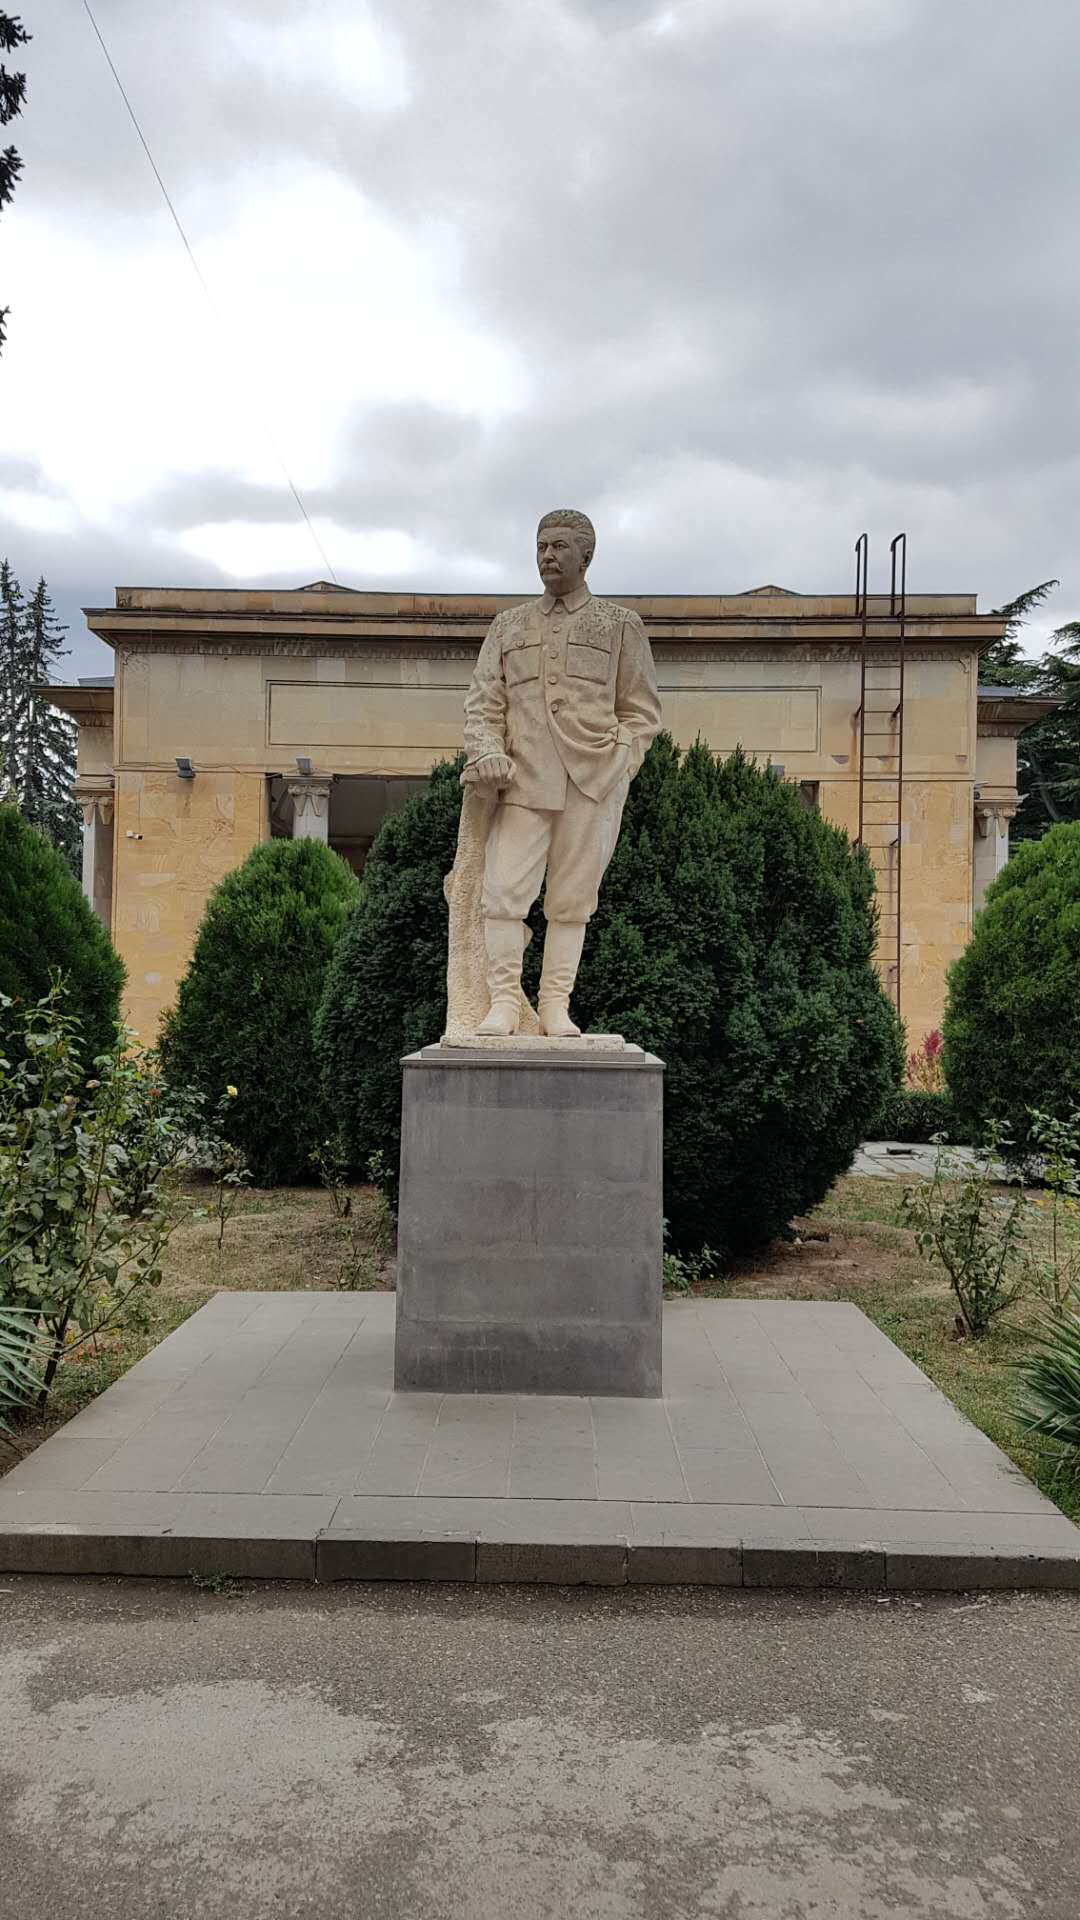 A statue of Stalin in Artsakh